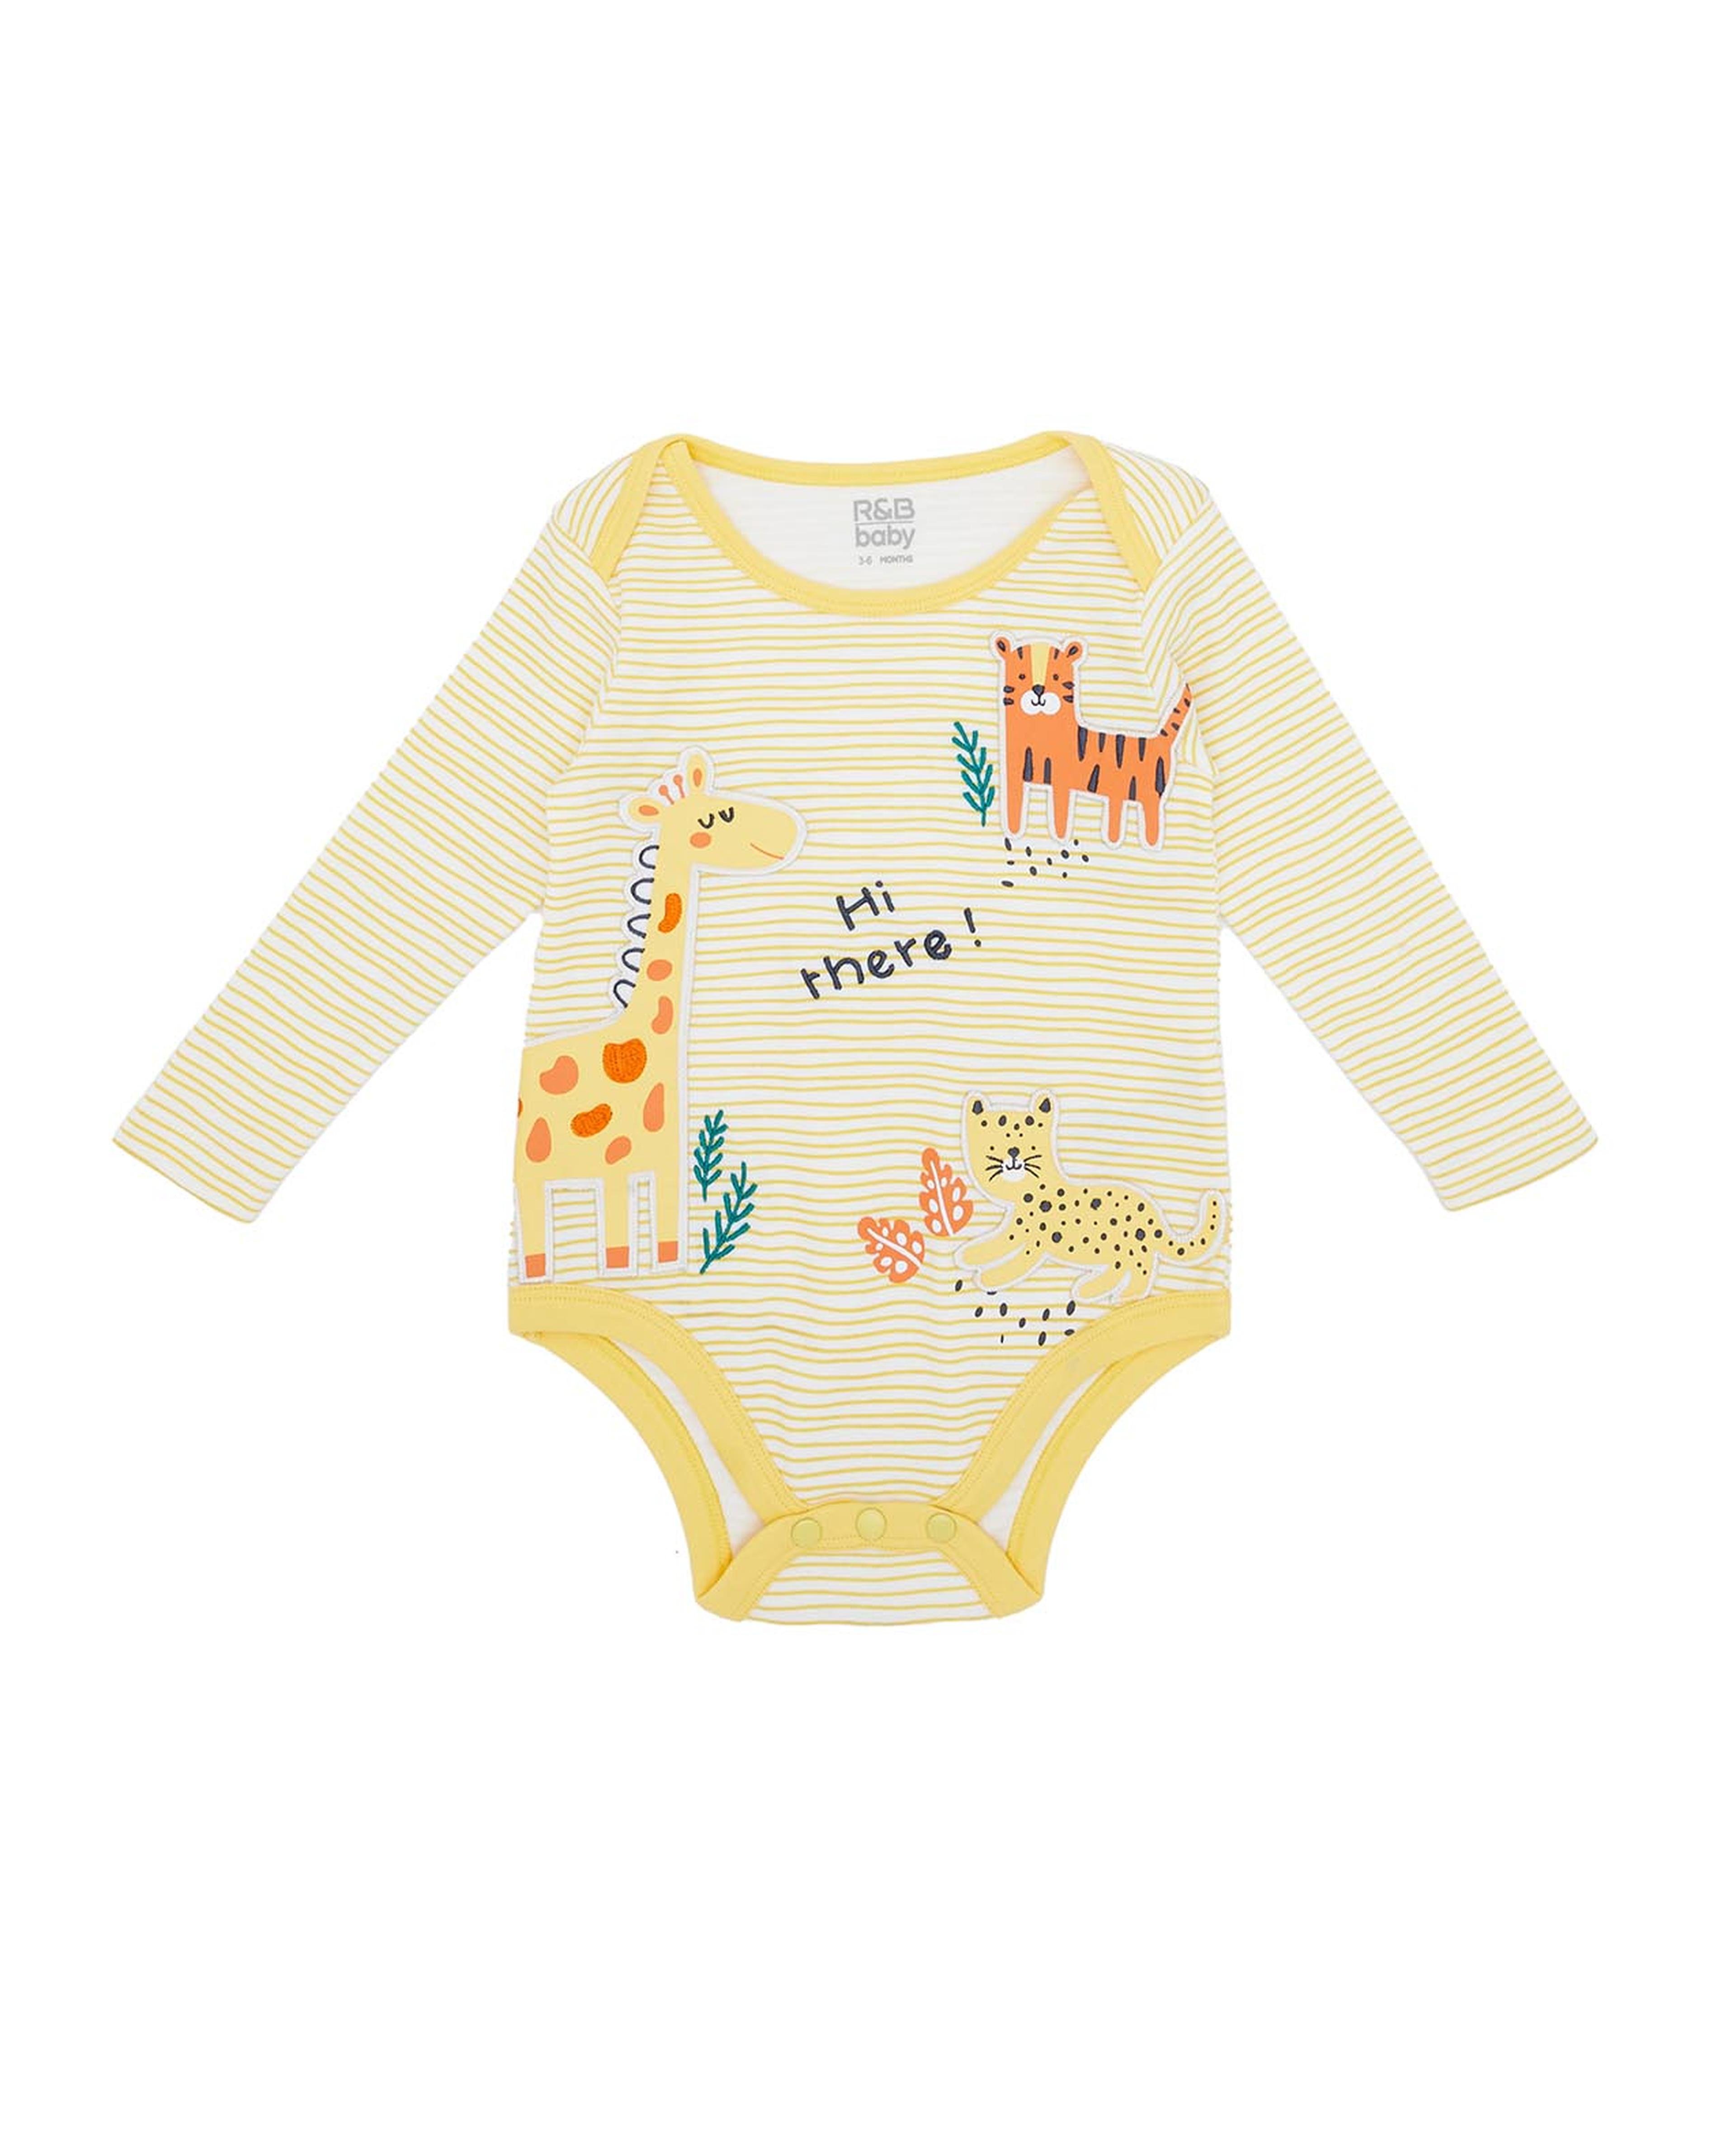 Applique Work Bodysuit with Long Sleeves